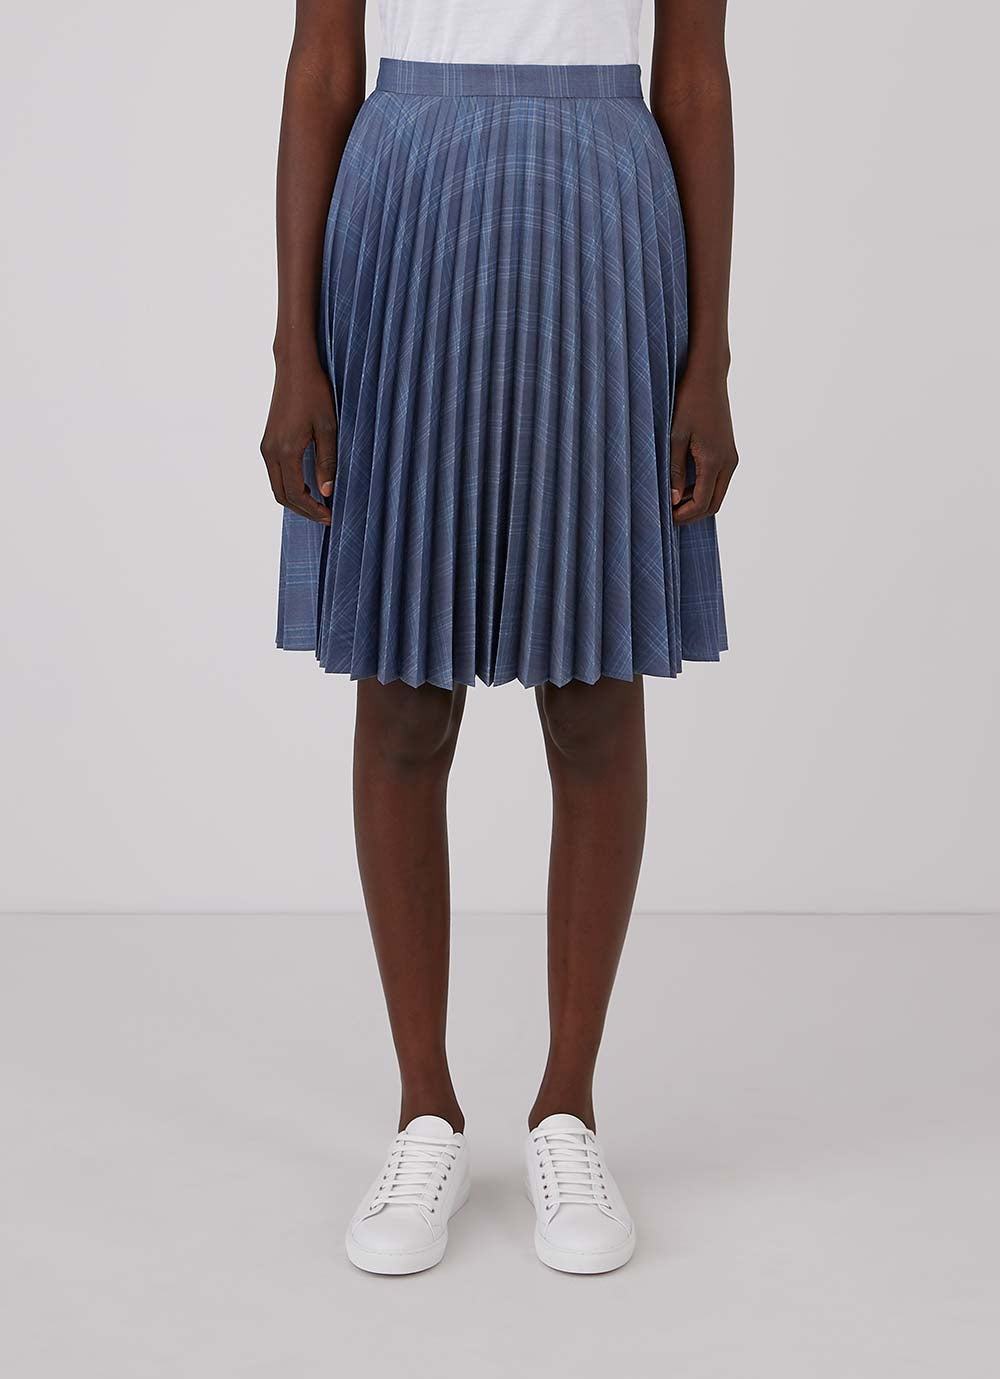 Women's Wool Sunray Pleated Skirt in Blue Check